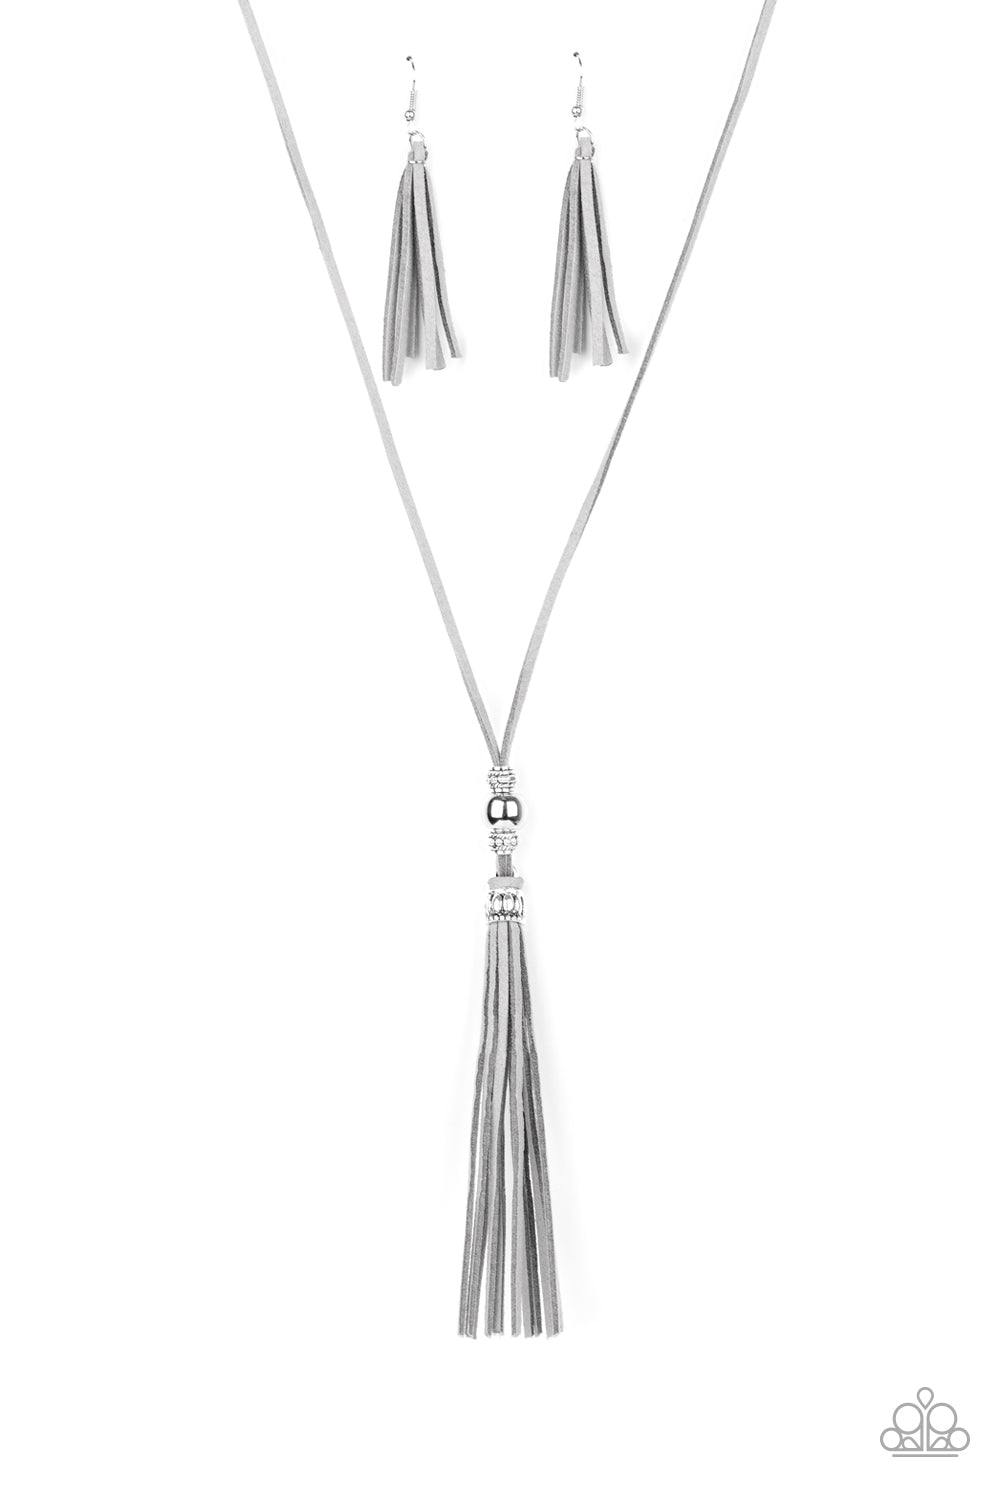 Hold My Tassel - Paparazzi - Silver Gray Suede Tassel Necklace